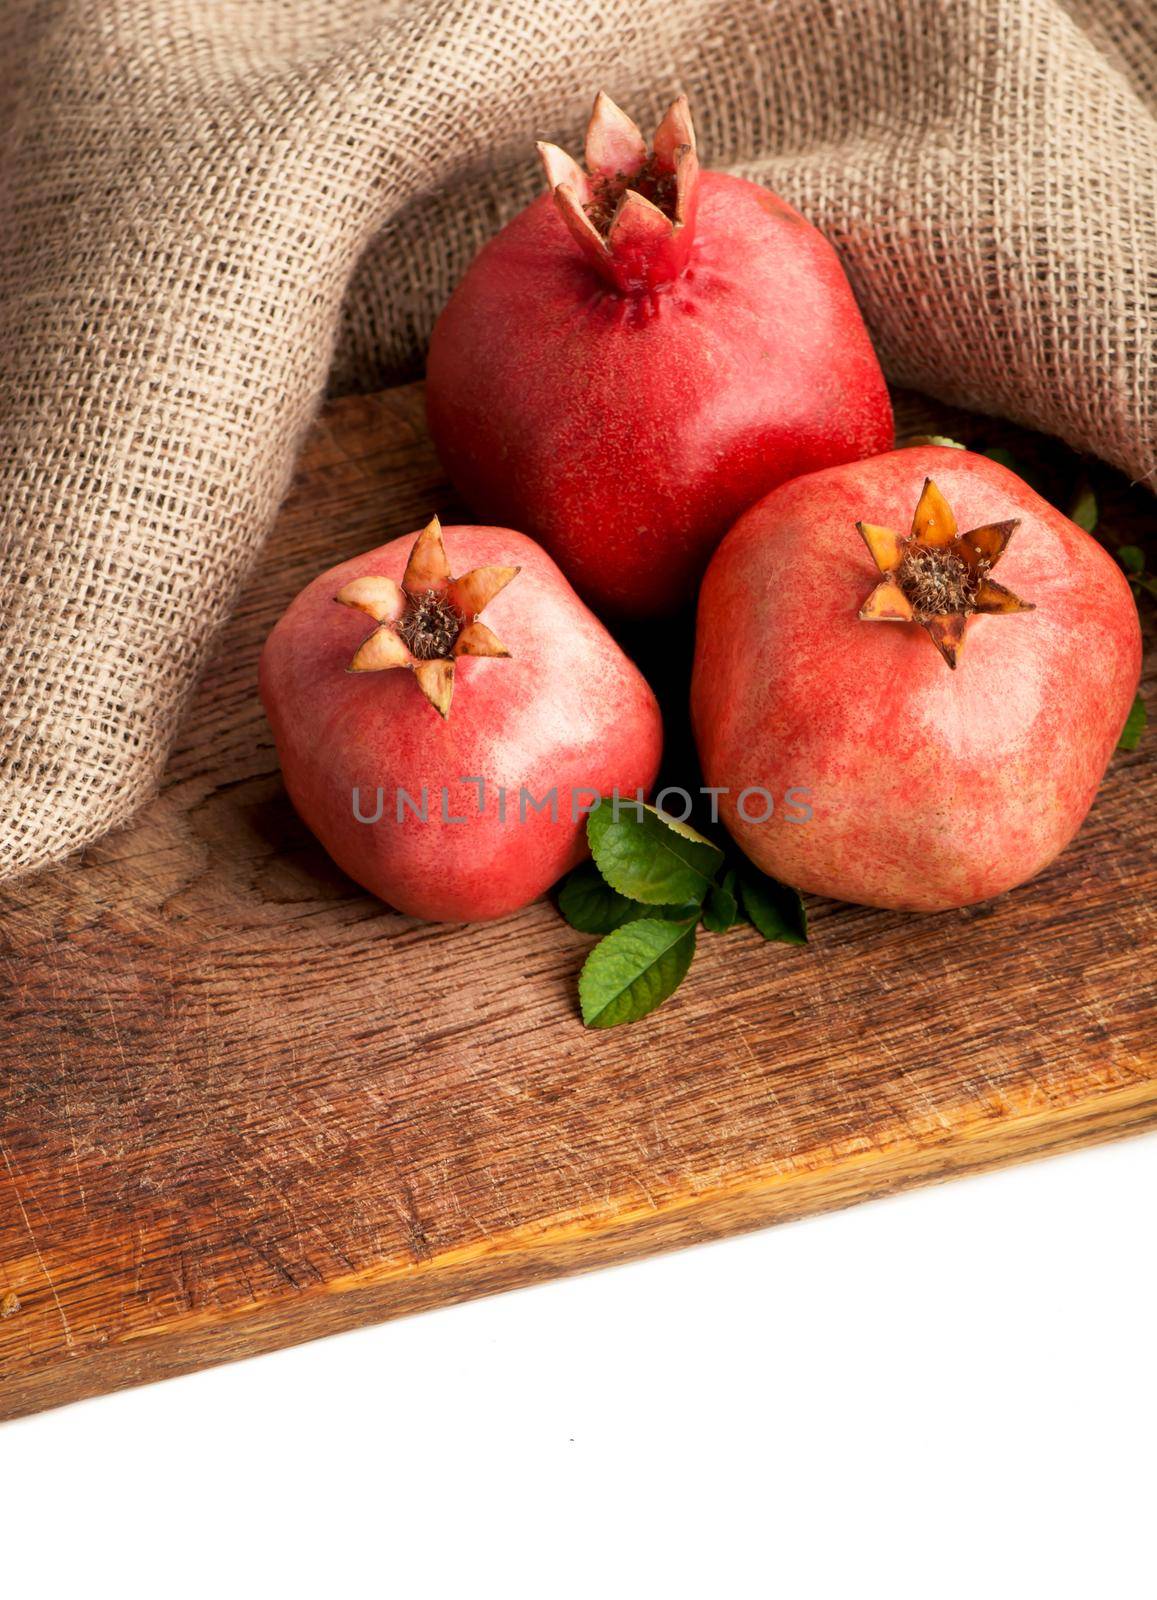 Pomegranate on wooden boards and linen fabric isolated by the white